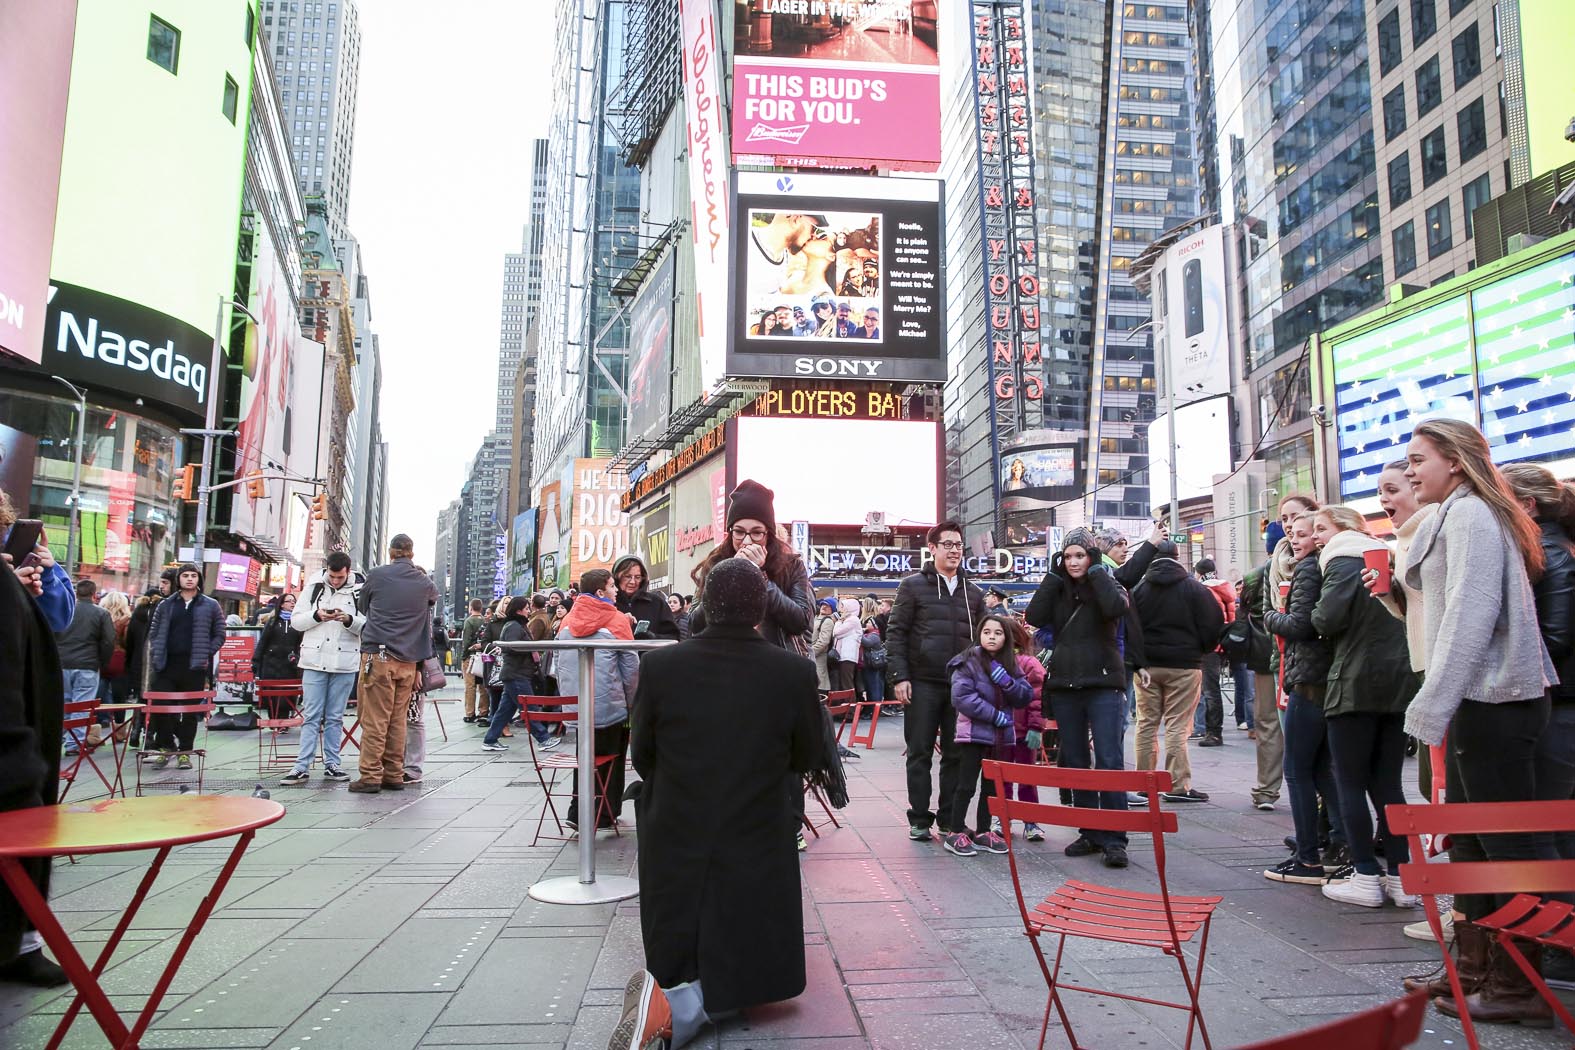 Michael's Times Square Big Screen Marriage Proposal